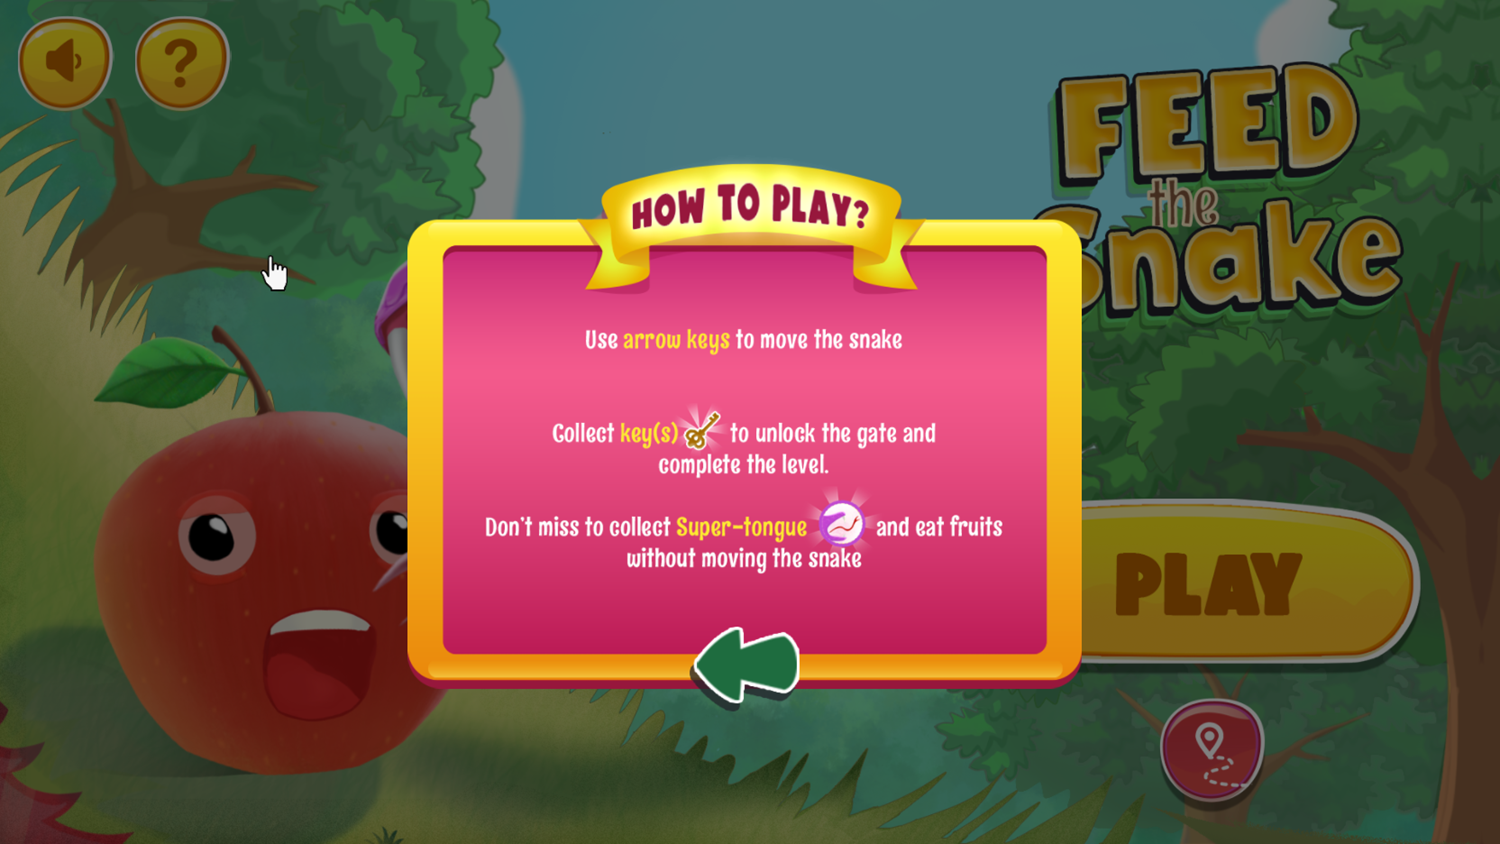 Feed The Snake Game How To Play Screenshot.